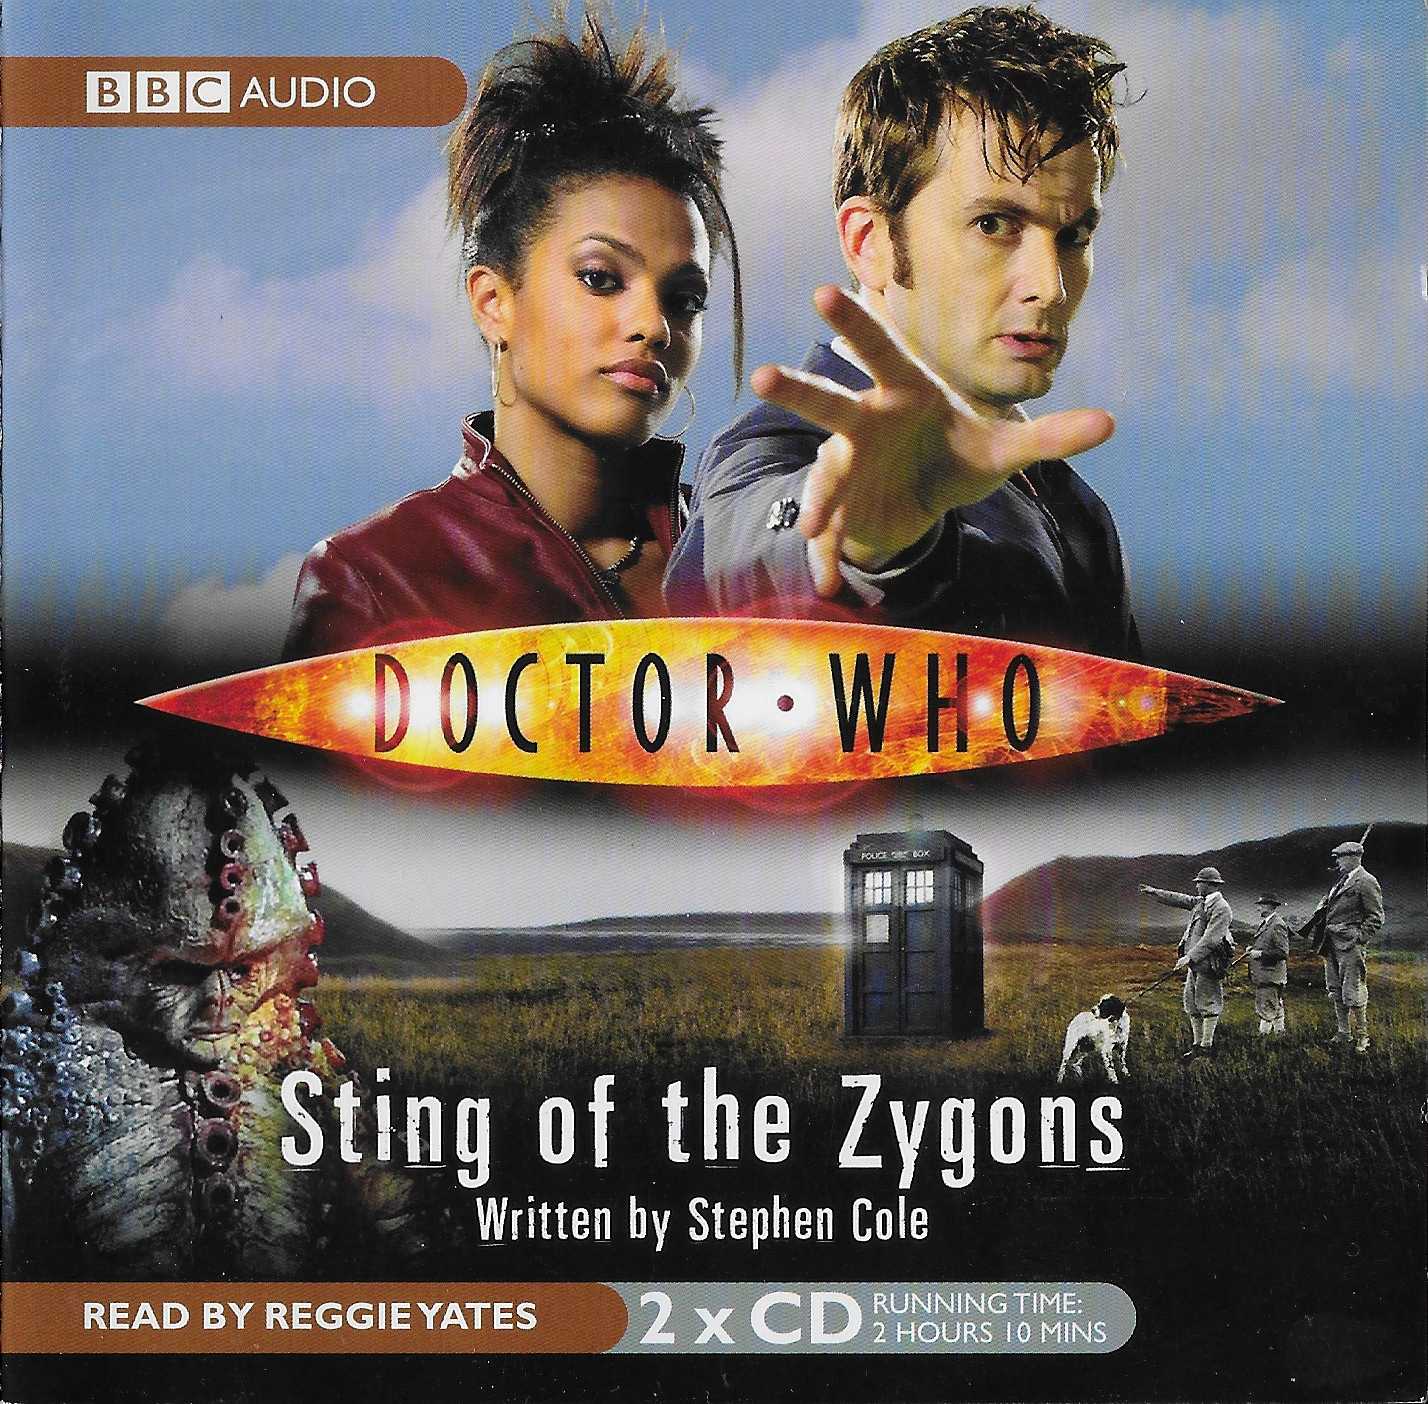 Picture of Doctor Who - Sting of the Zygons by artist Stephen Cole from the BBC cds - Records and Tapes library